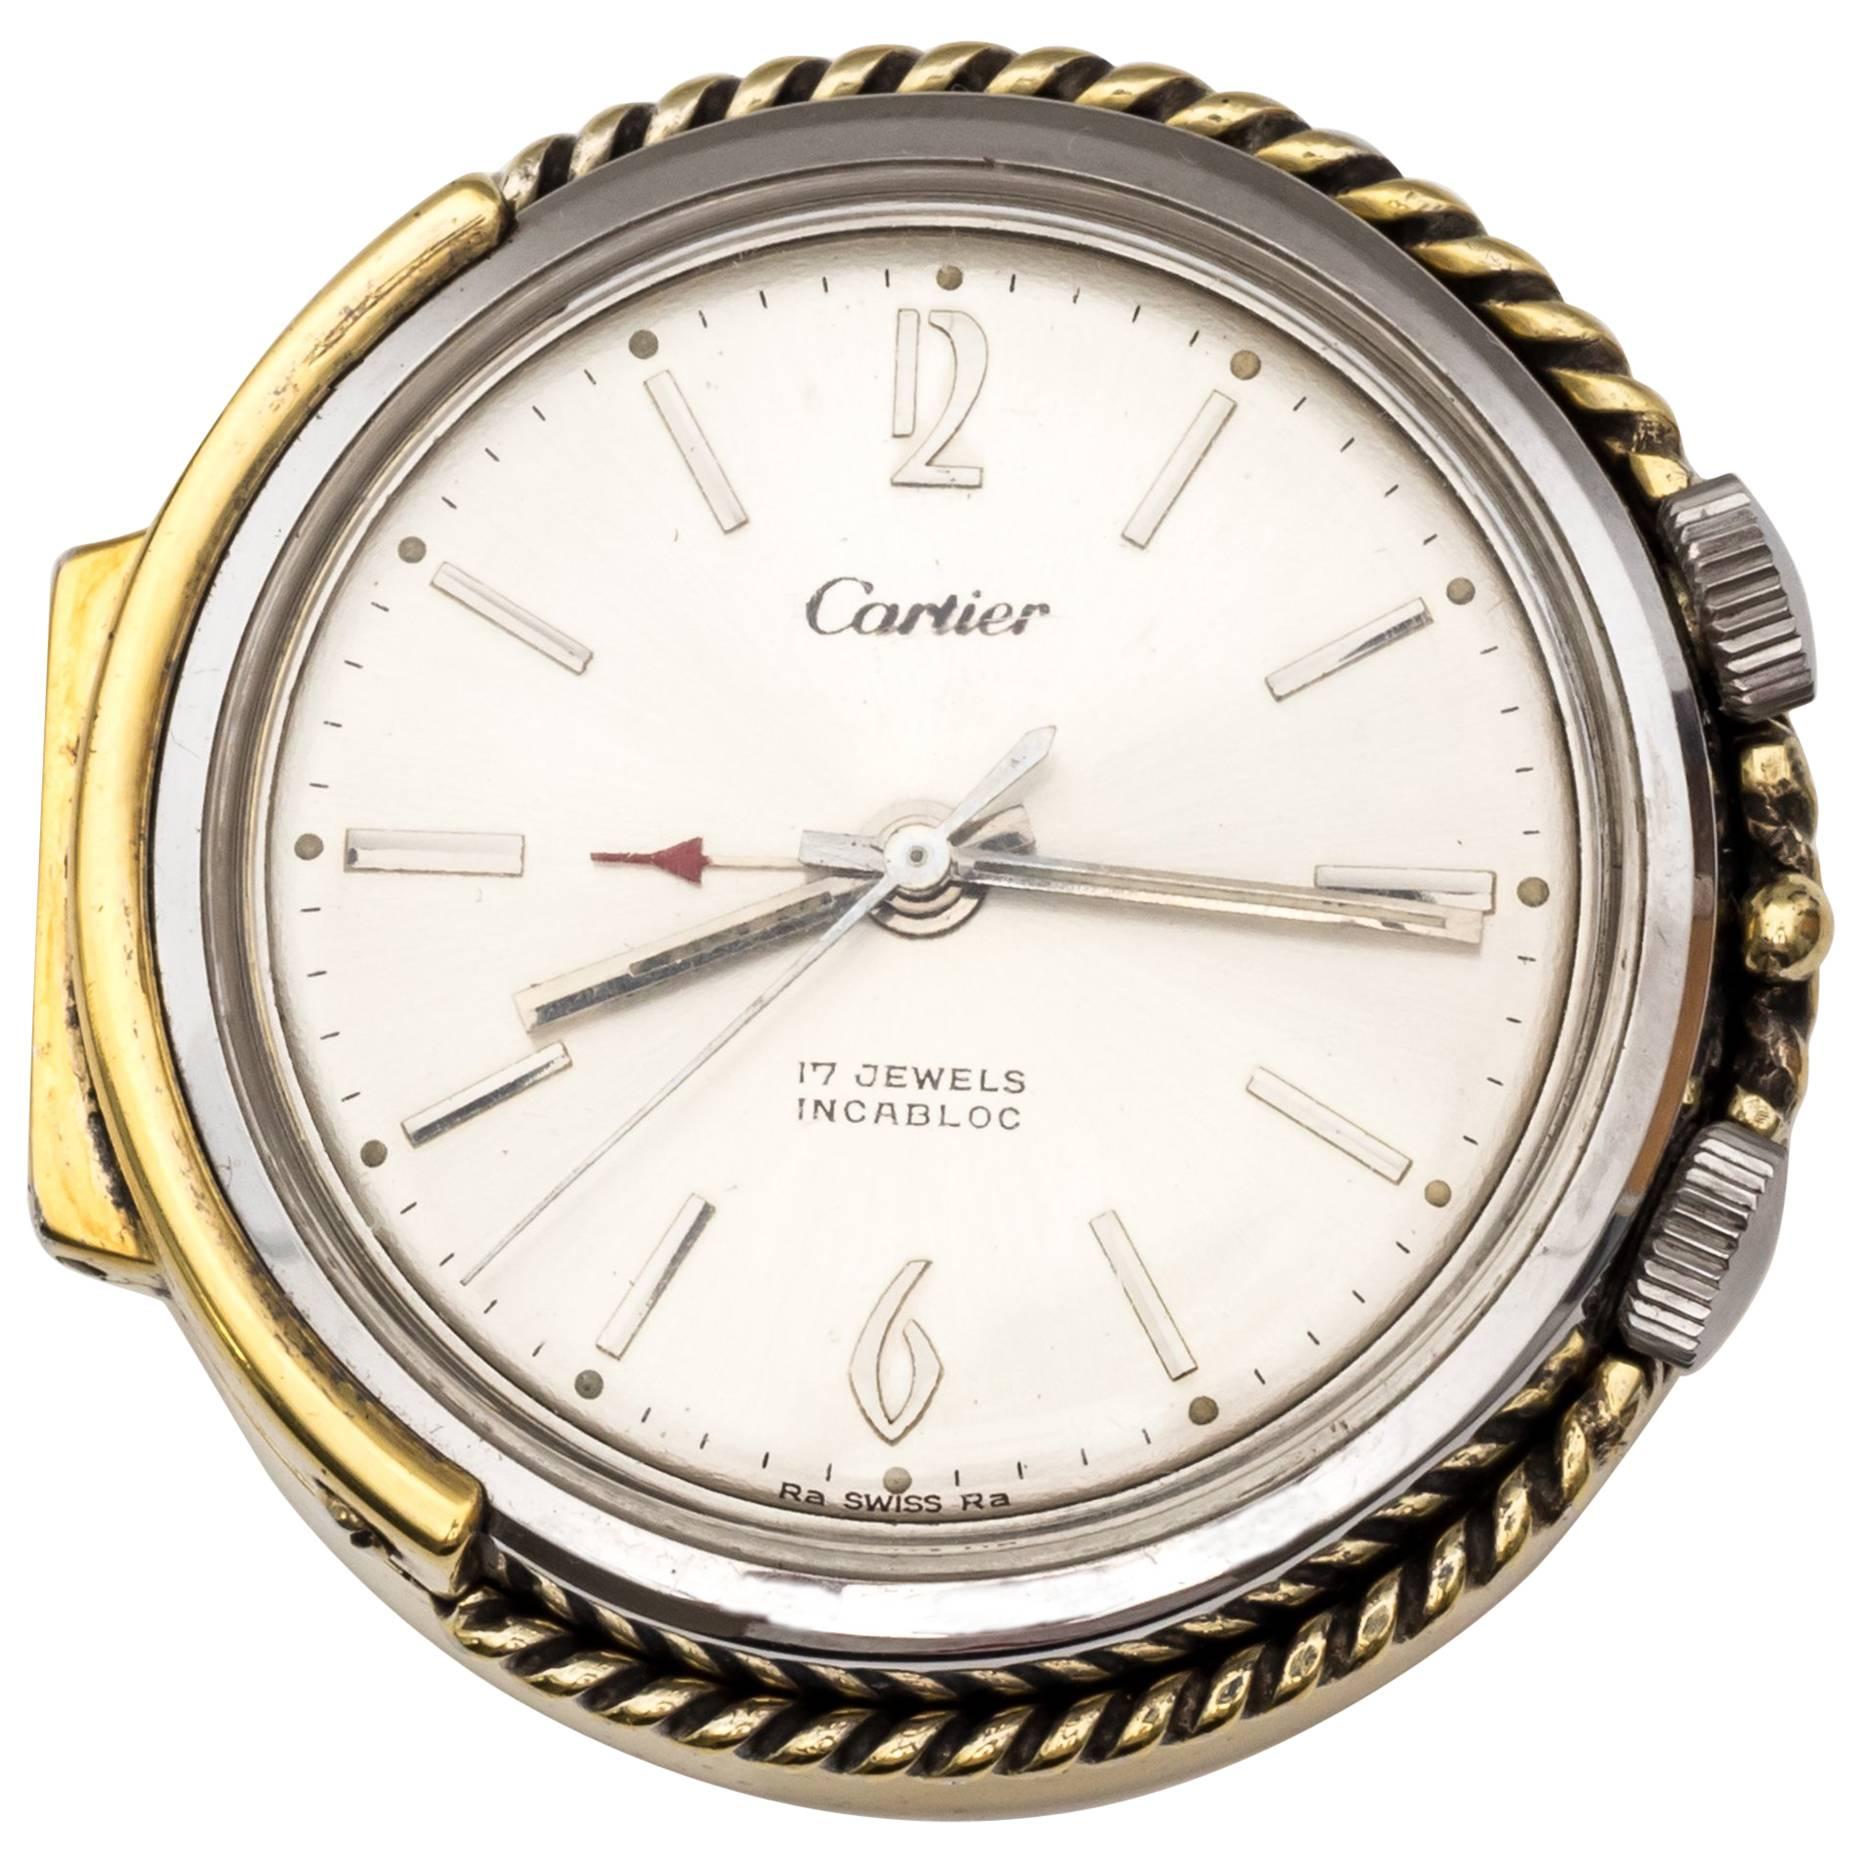 What is the classic Cartier watch?